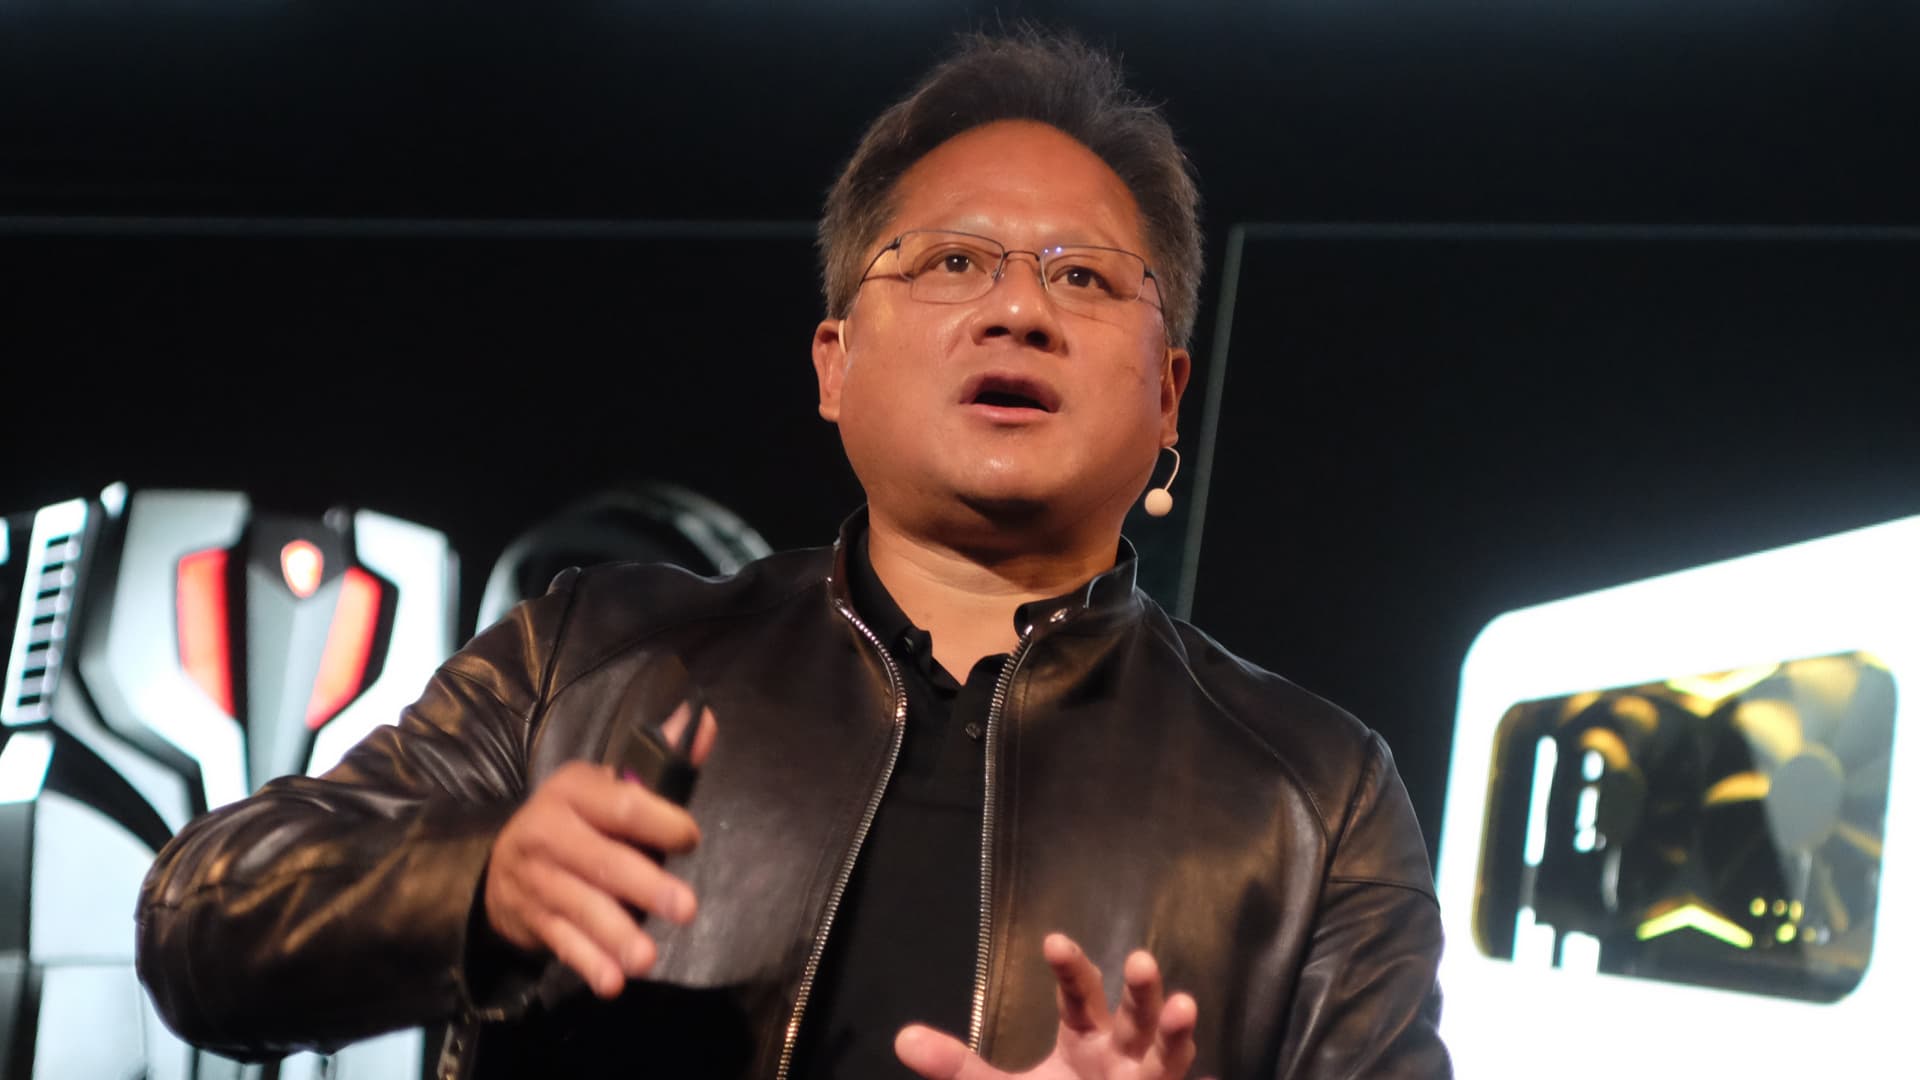 Nvidia’s chips fuel A.I. — here’s why the U.S. worries about China’s access